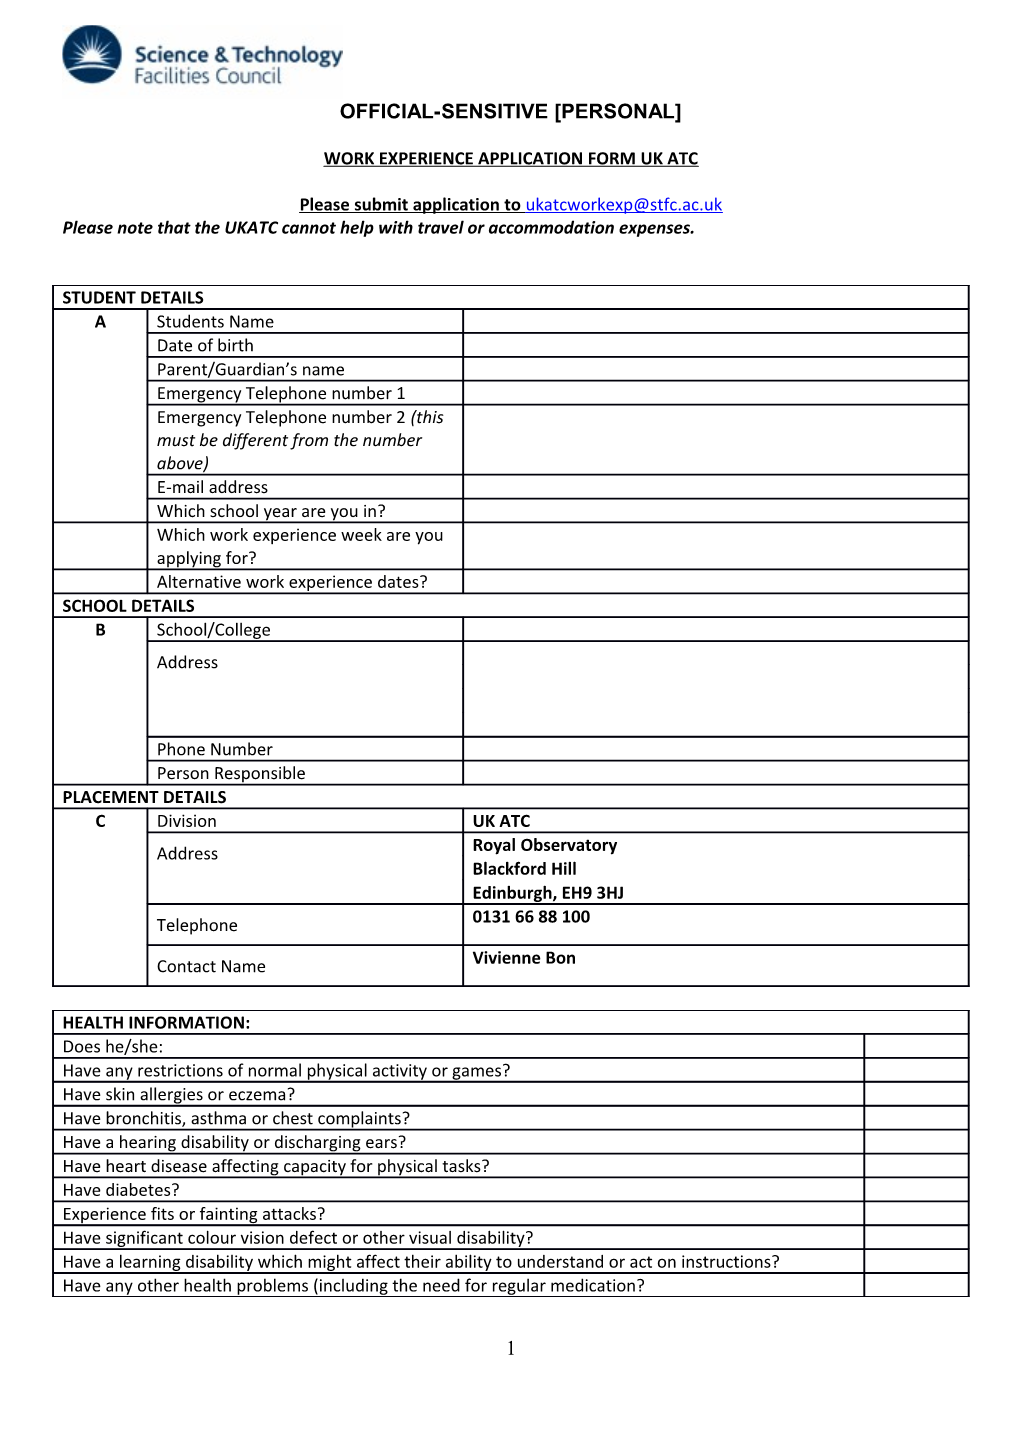 Work Experience Application Form Uk Atc